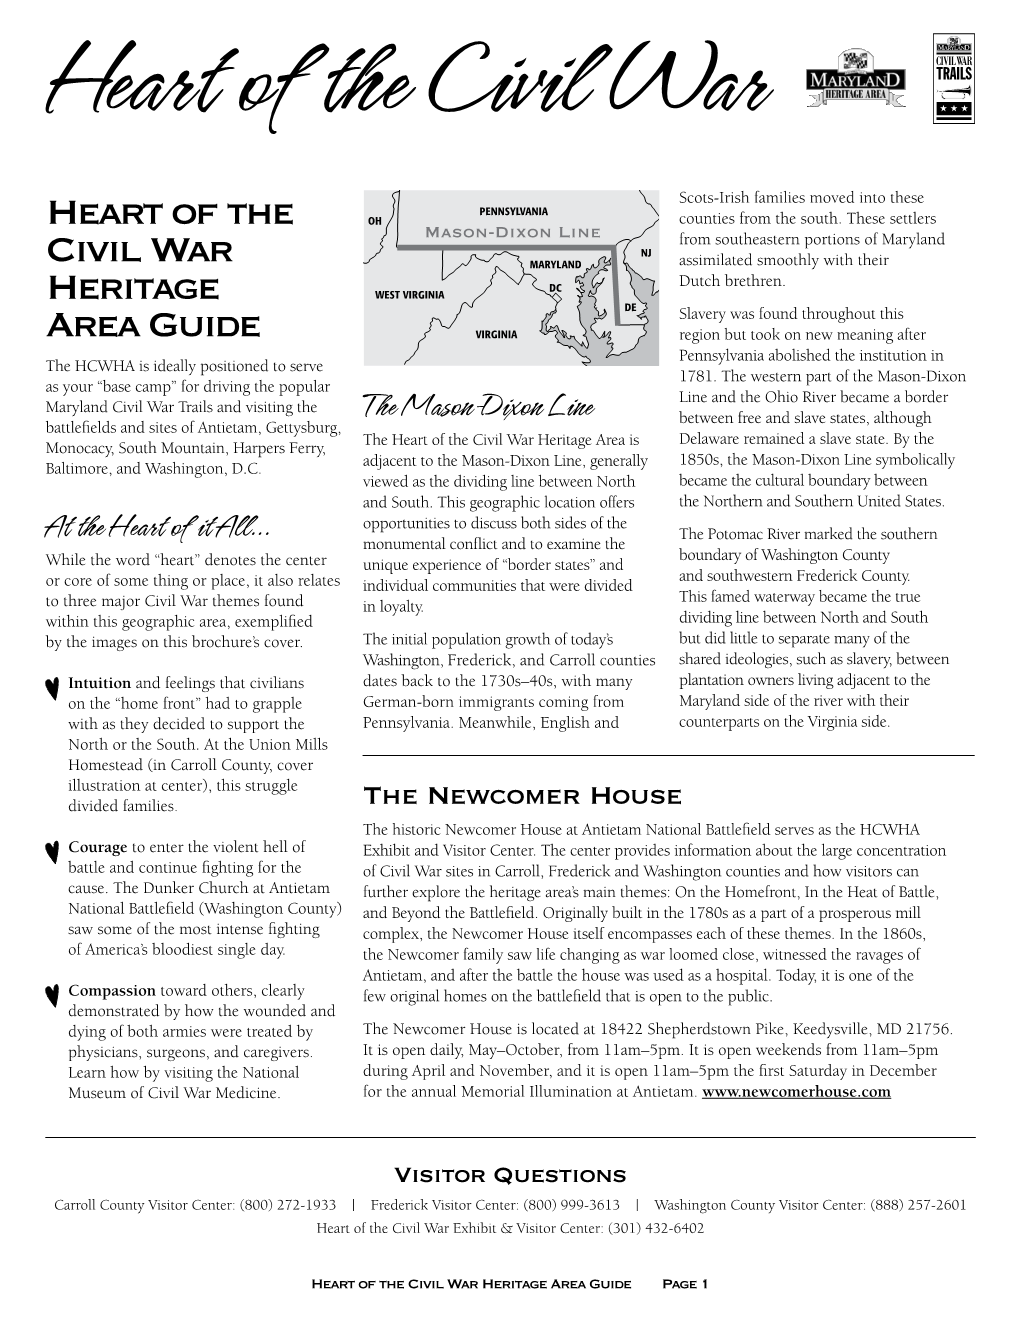 Heart of the Civil War Heritage Area Guide Page 1 on The